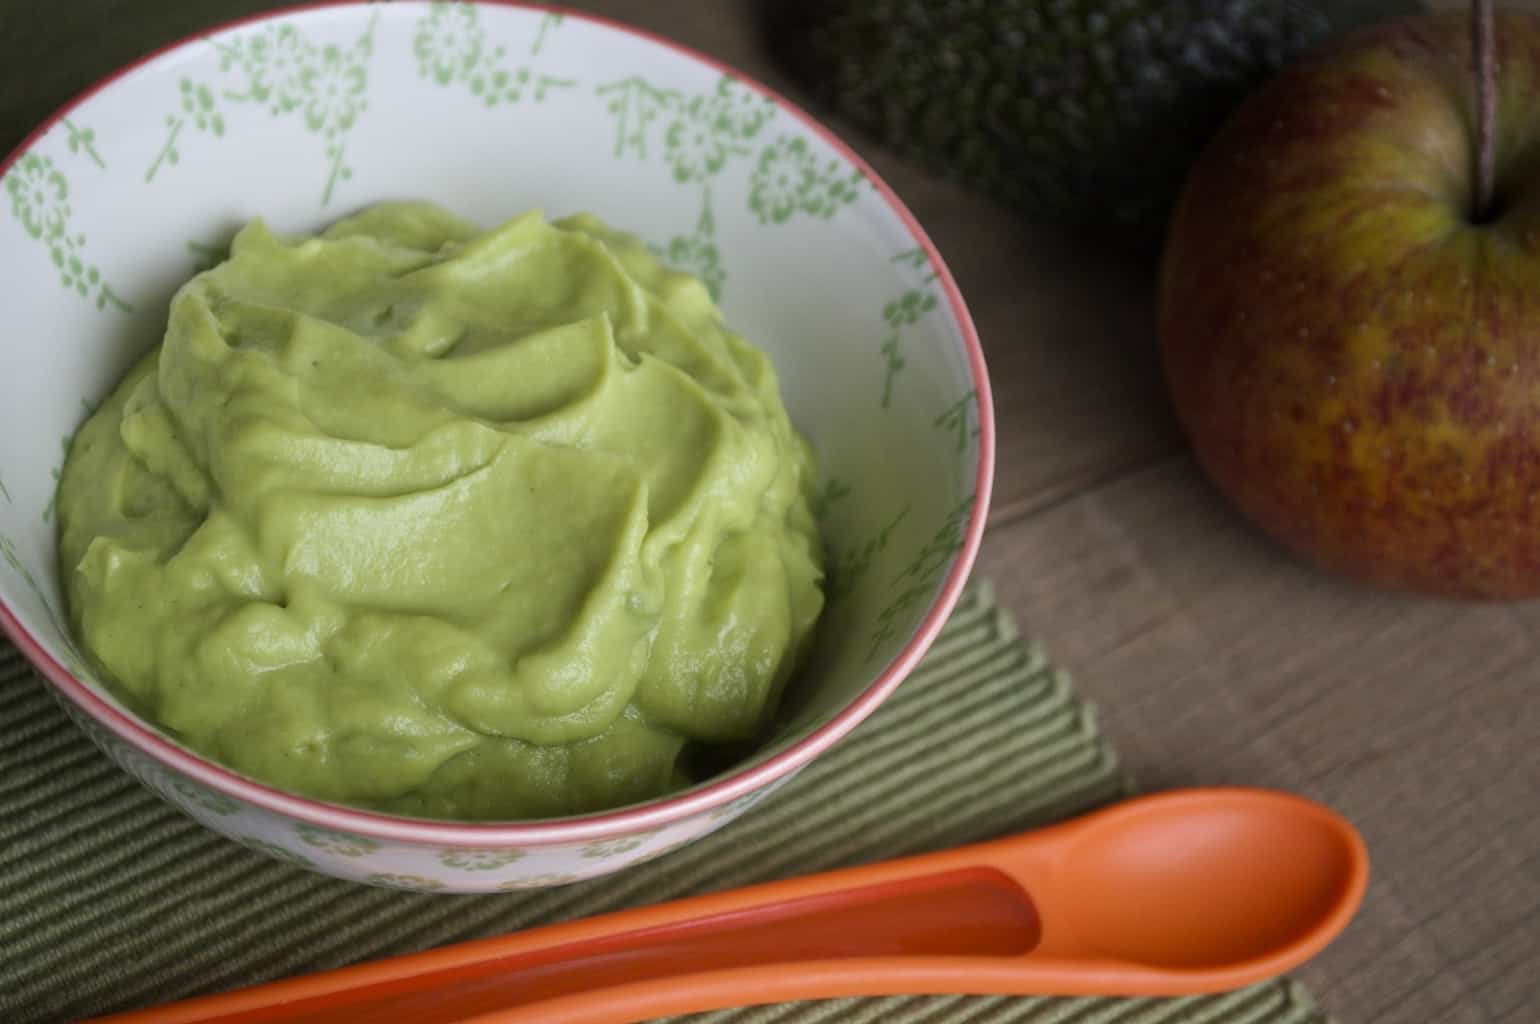 Loaded with nutrients, avocados and apples are must ingredients for your baby's first purees.